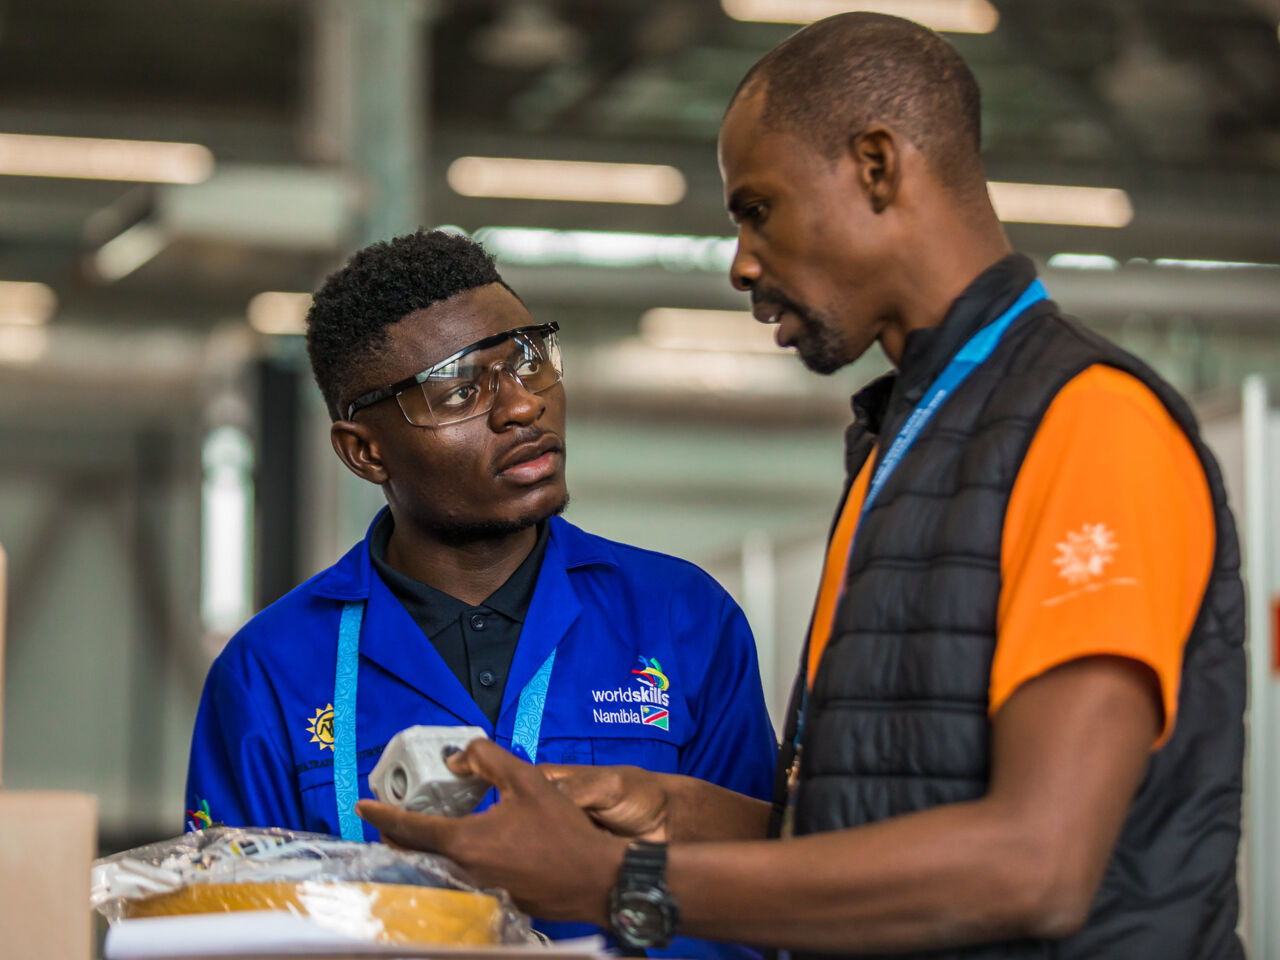 How the WorldSkills Experts Faculty is impacting the lives of people in Sudan